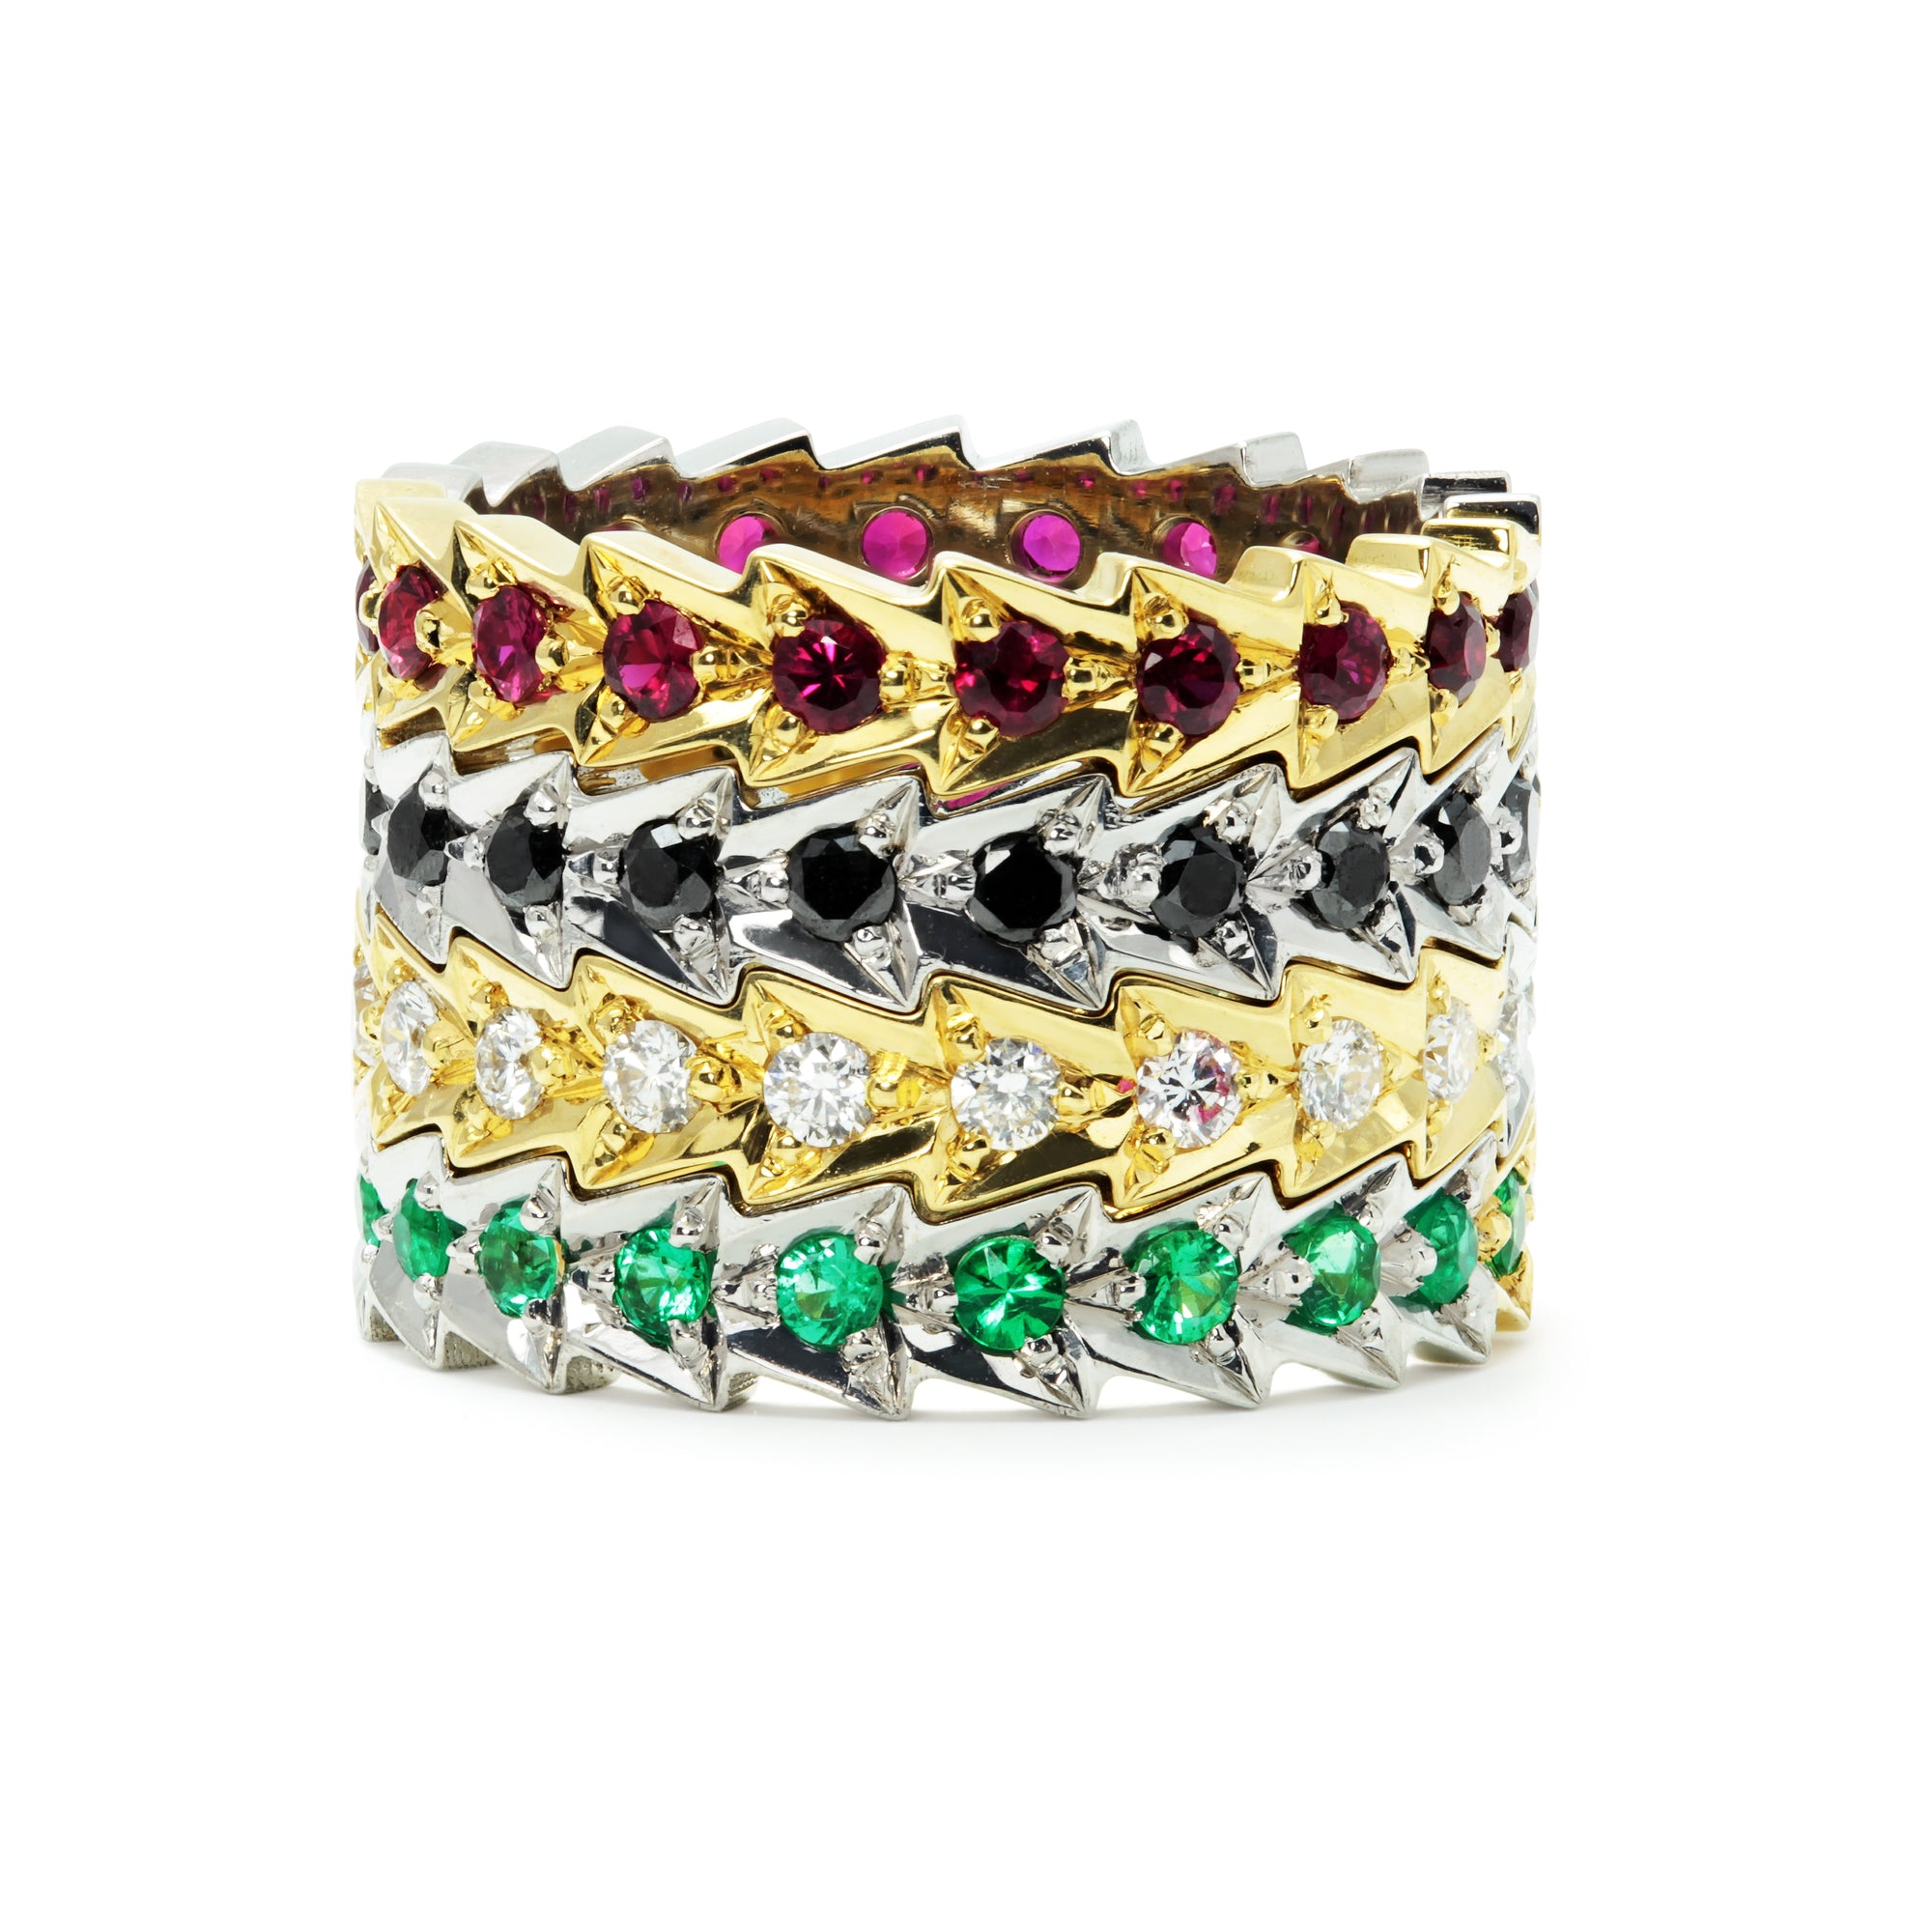 Bespoke Owen interlocking stacking rings, 18ct recycled white and yellow gold, fair-traded rubies, emeralds and conflict-free diamonds